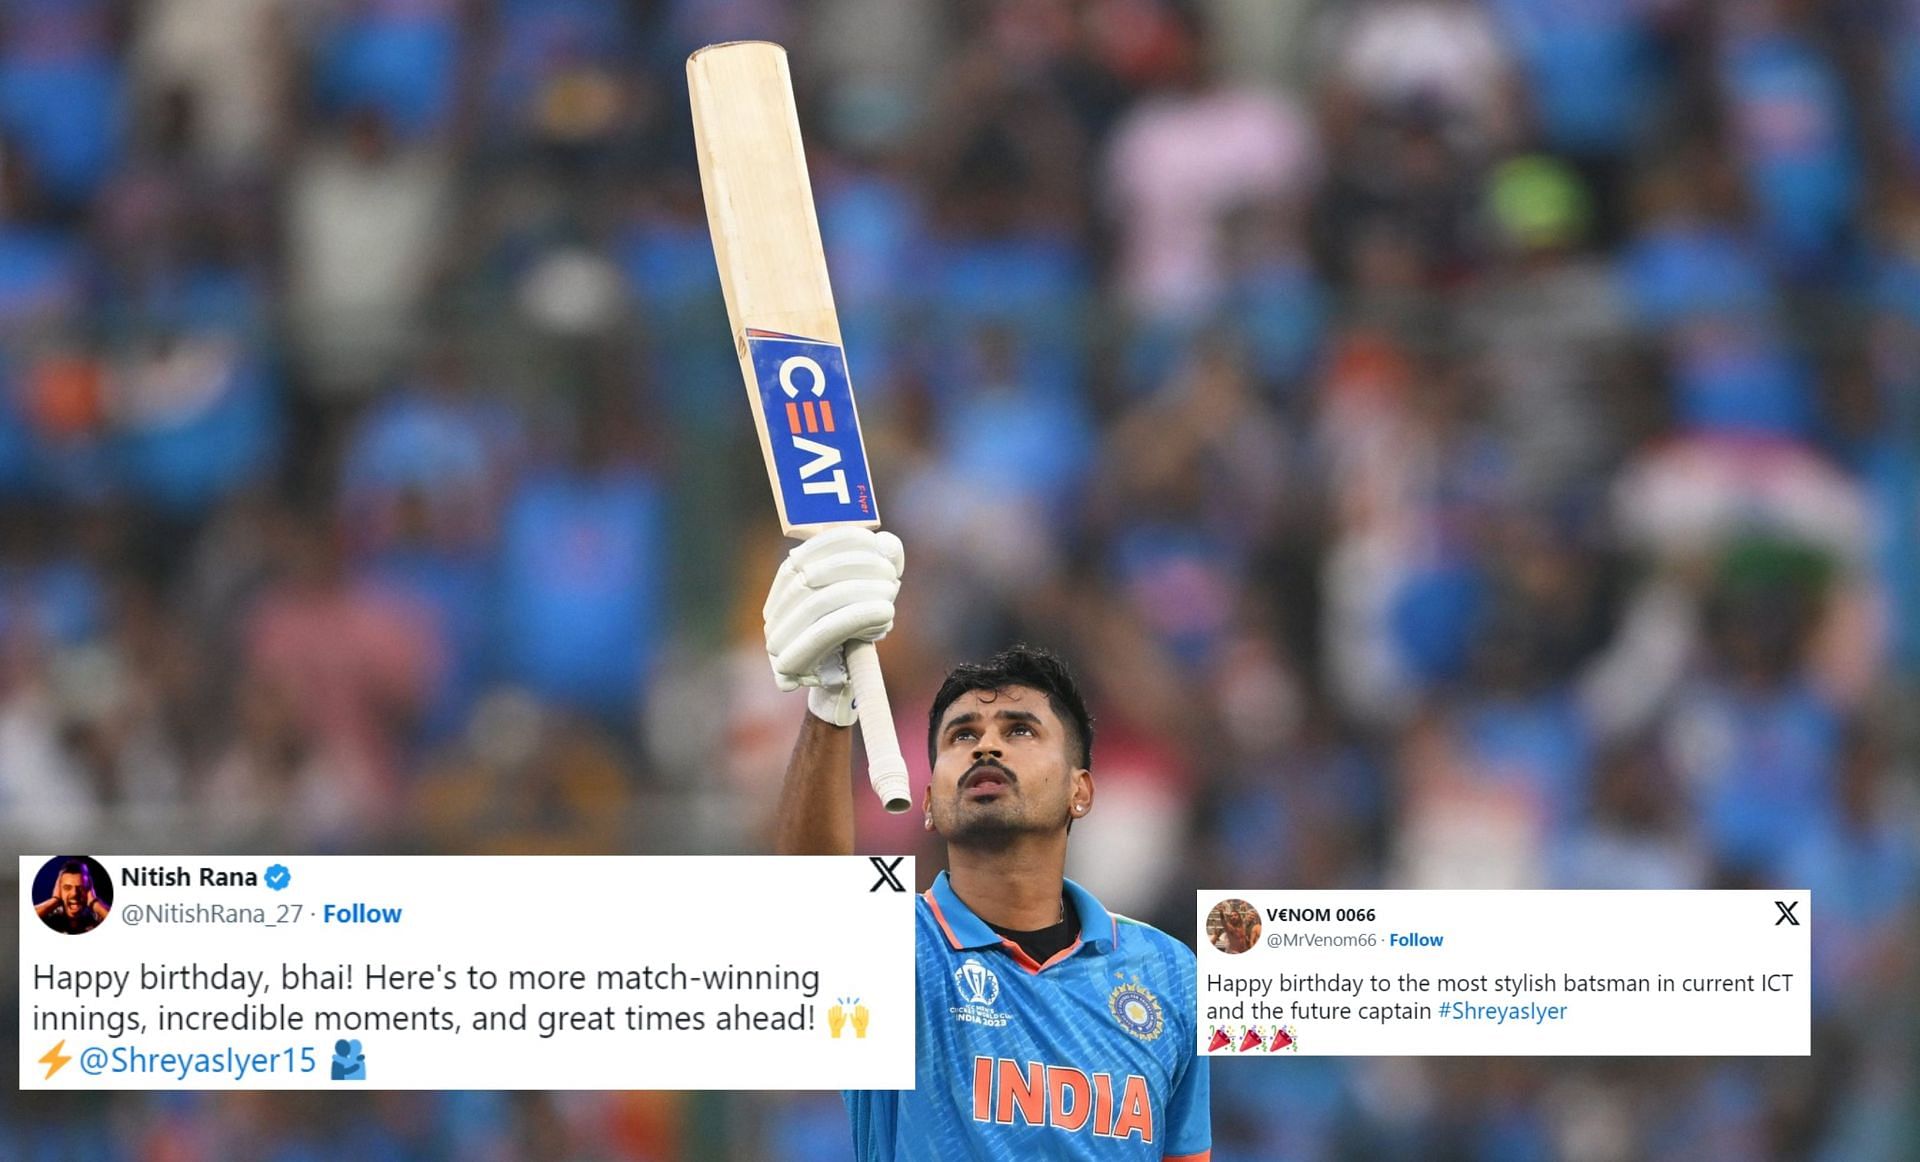 Shreyas Iyer received special wishes as he turned 29 today.